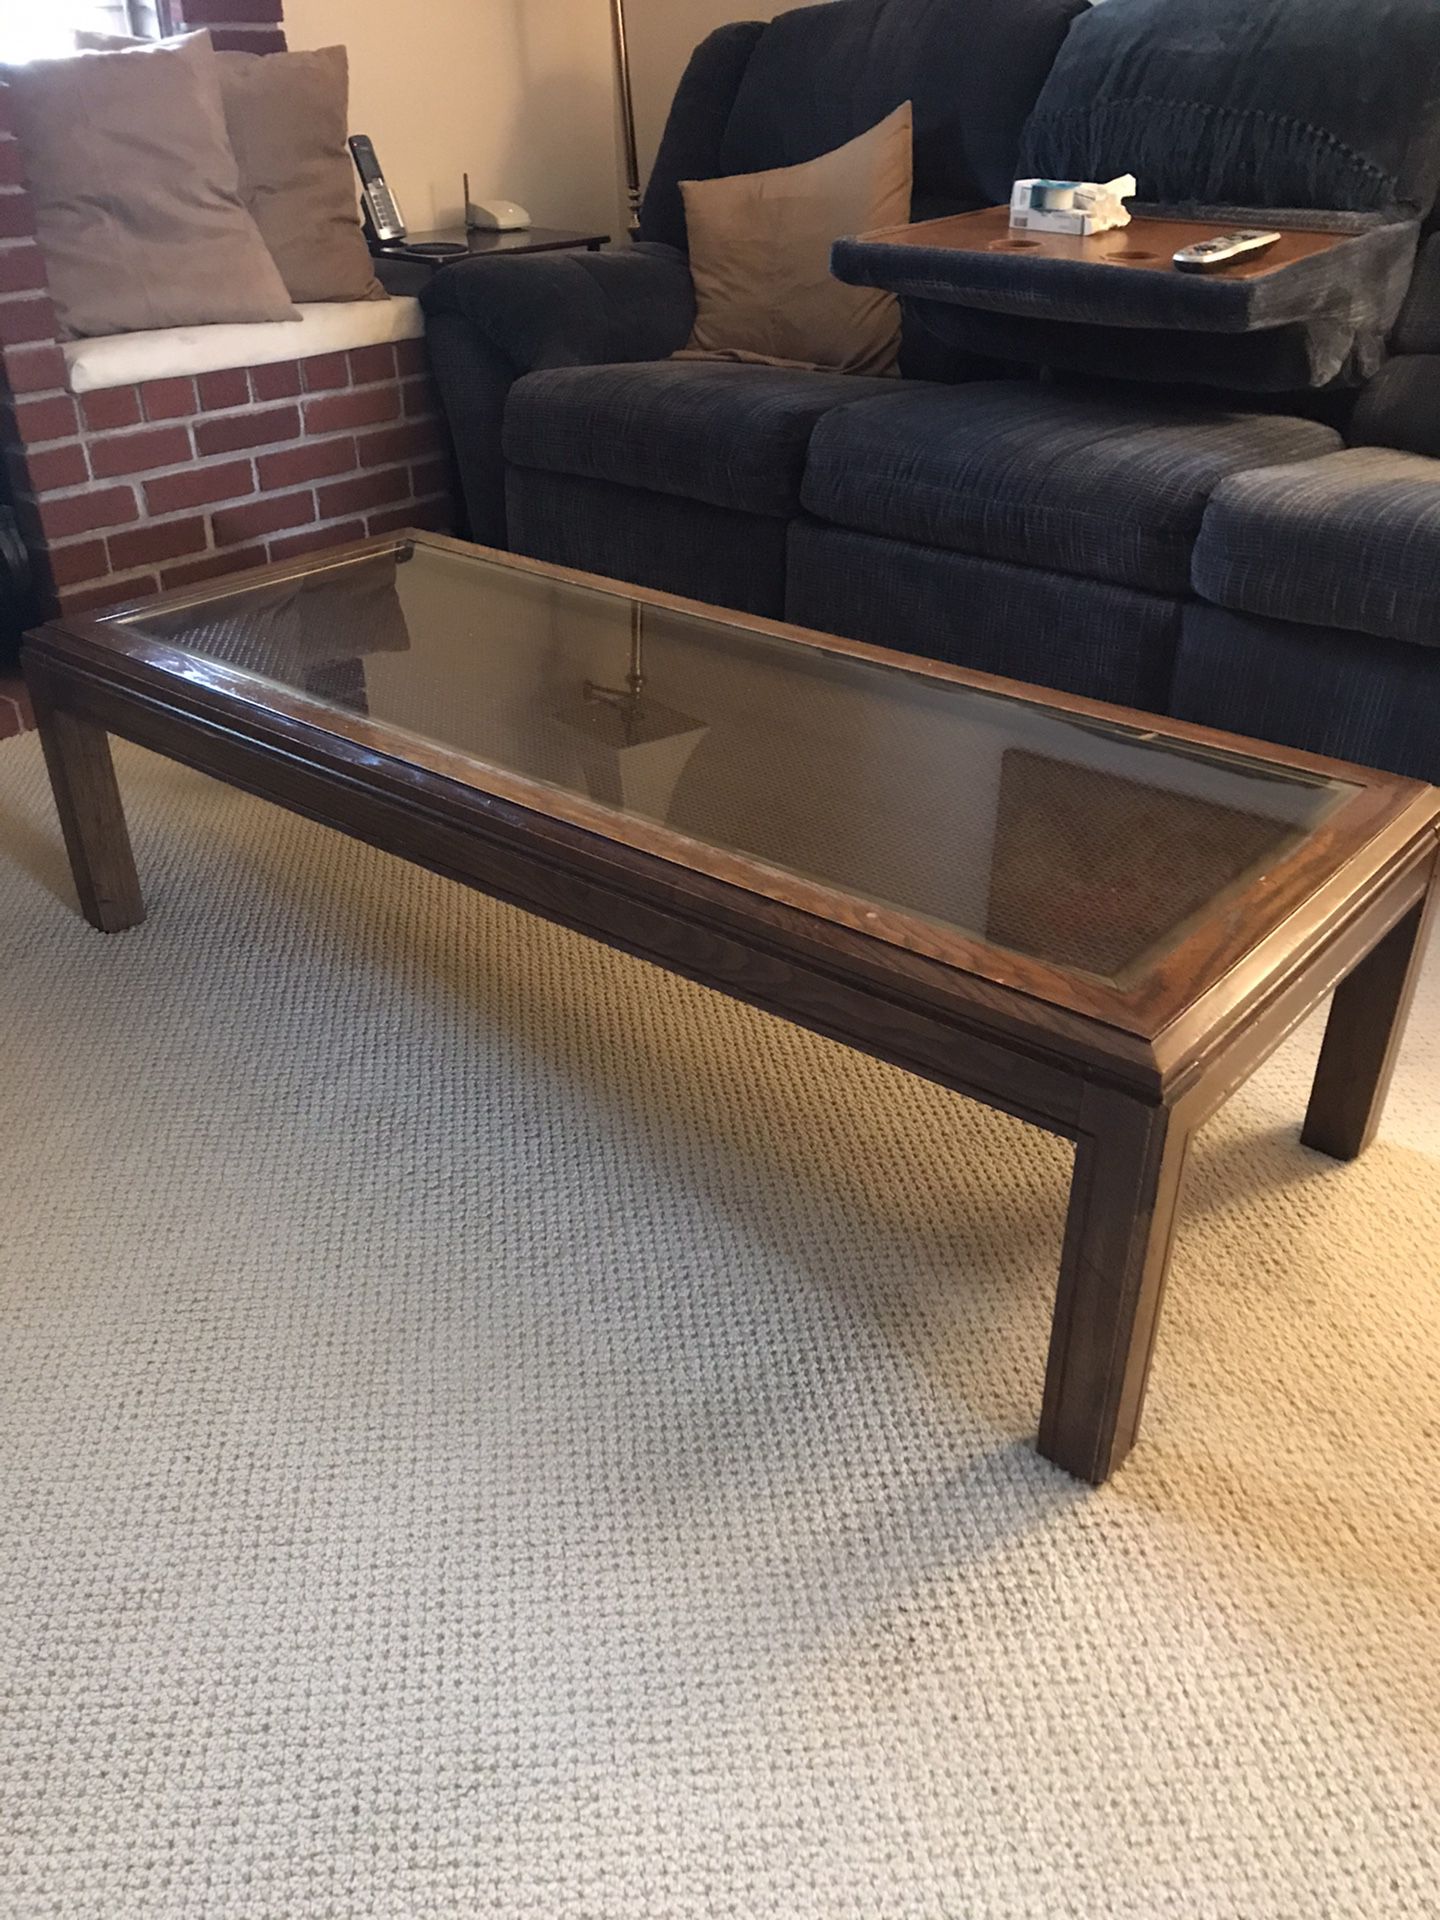 ** MARKED DOWN to Sell ** Walnut wood coffee with glass top and (2) End Tables All for $39 orB/O